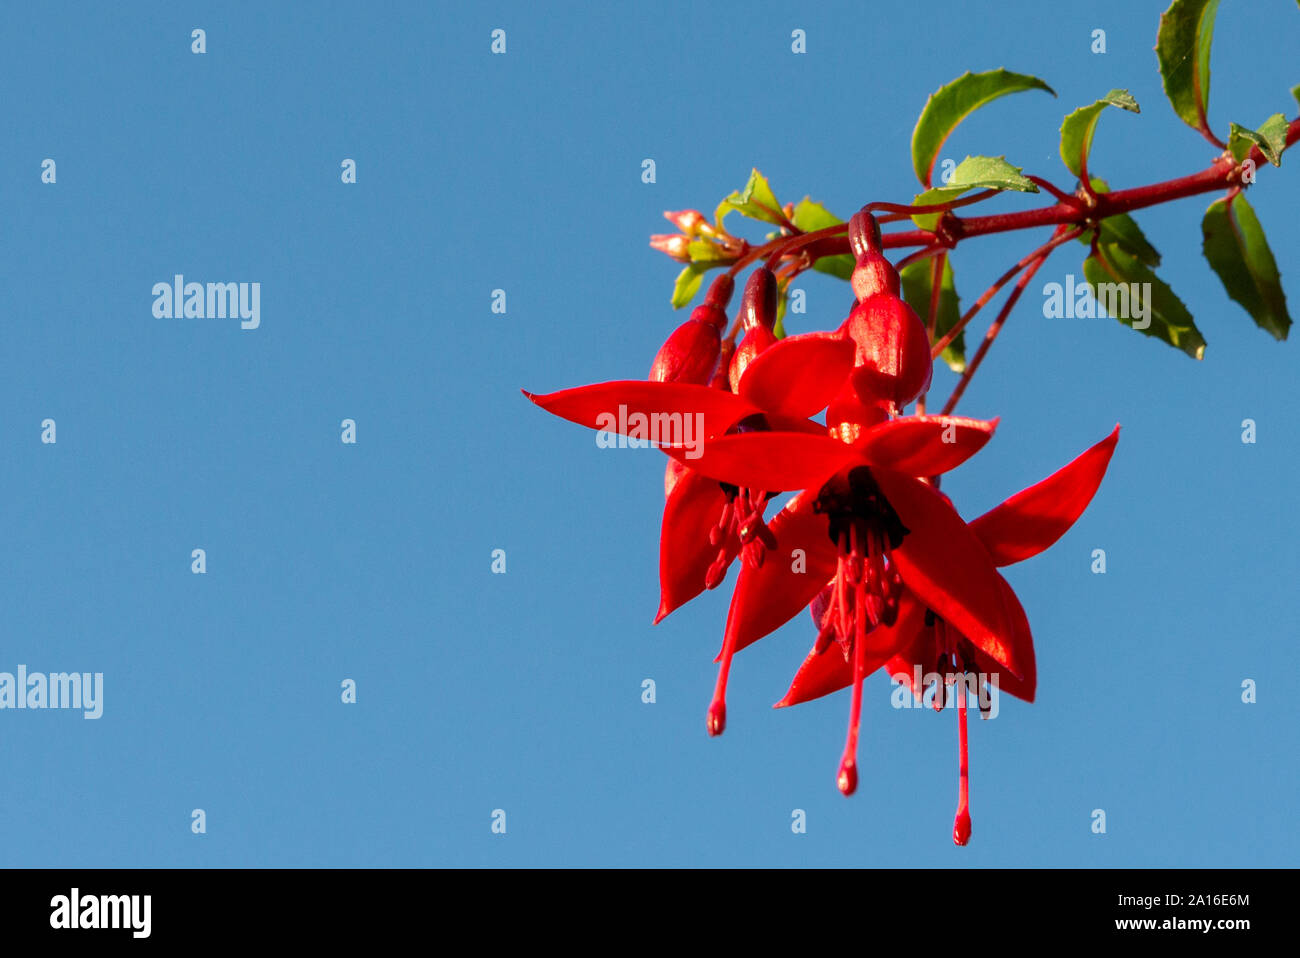 Fuchsia magellanica or hummingbird fuchsia or hardy fuchsia red bell-shaped flowers against blue sky with copy space Stock Photo